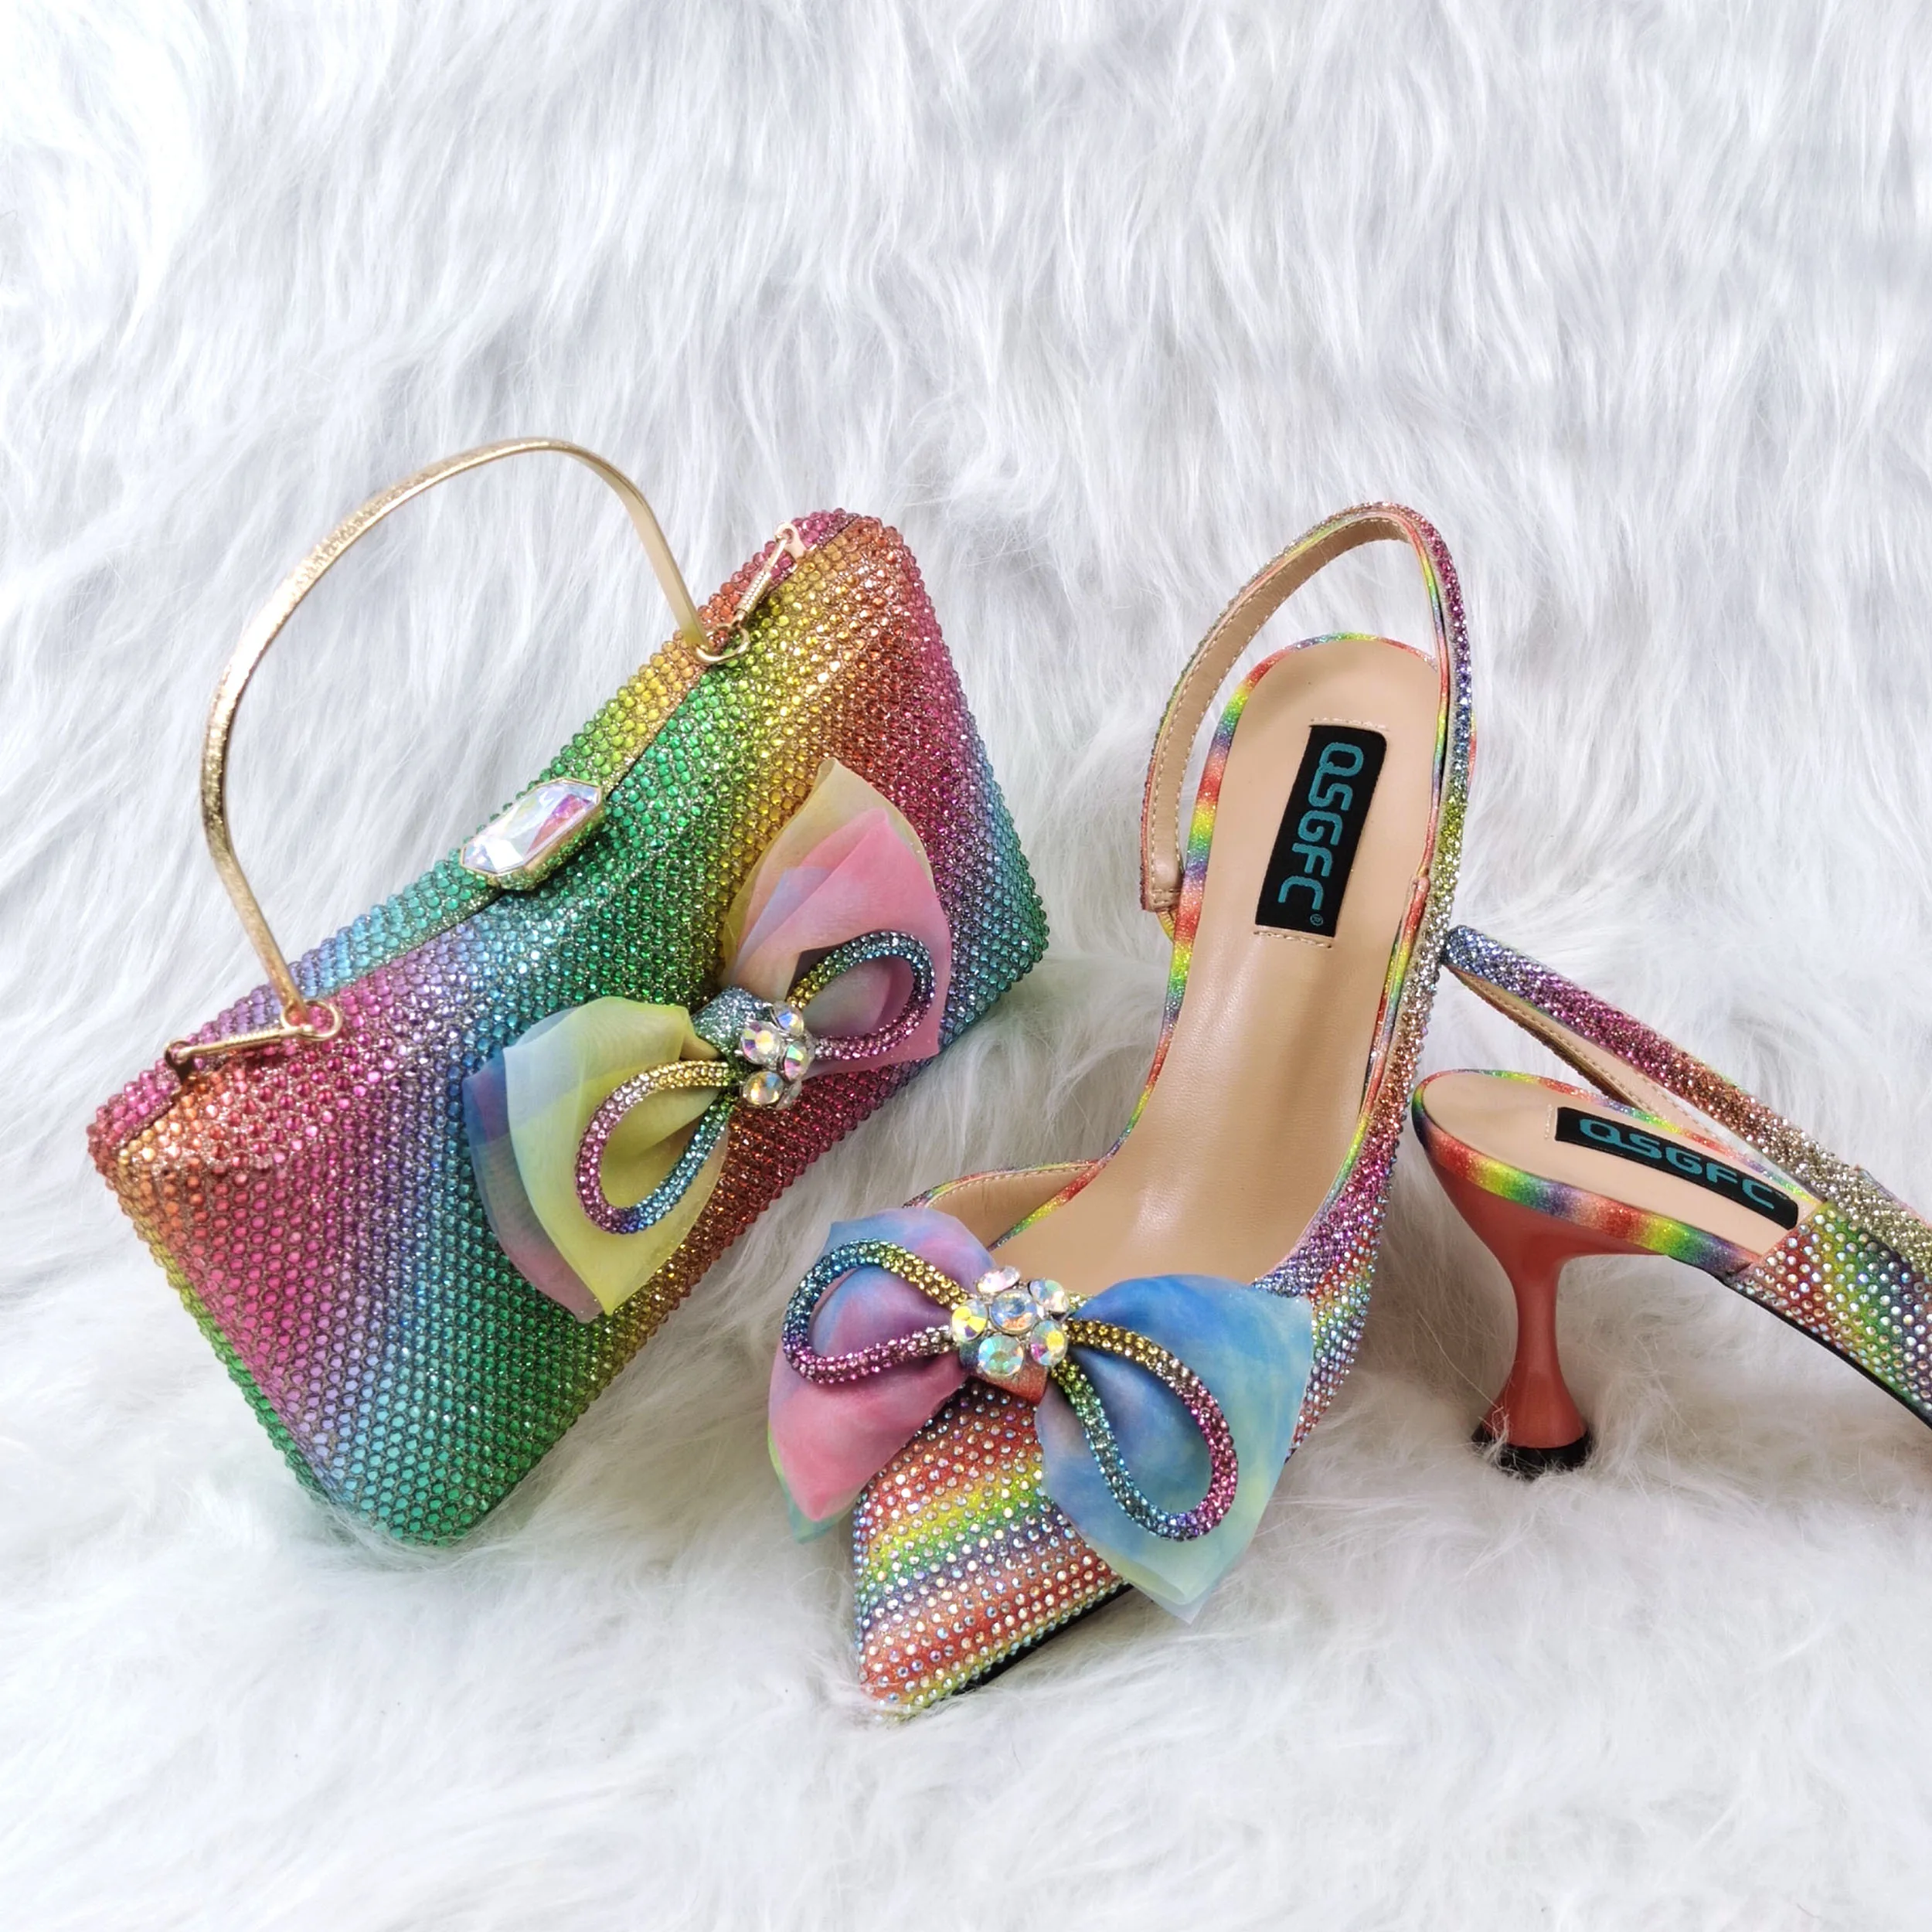 Multi-Coloured Strappy Sandals | Cute nike shoes, Sandals, Sandals heels